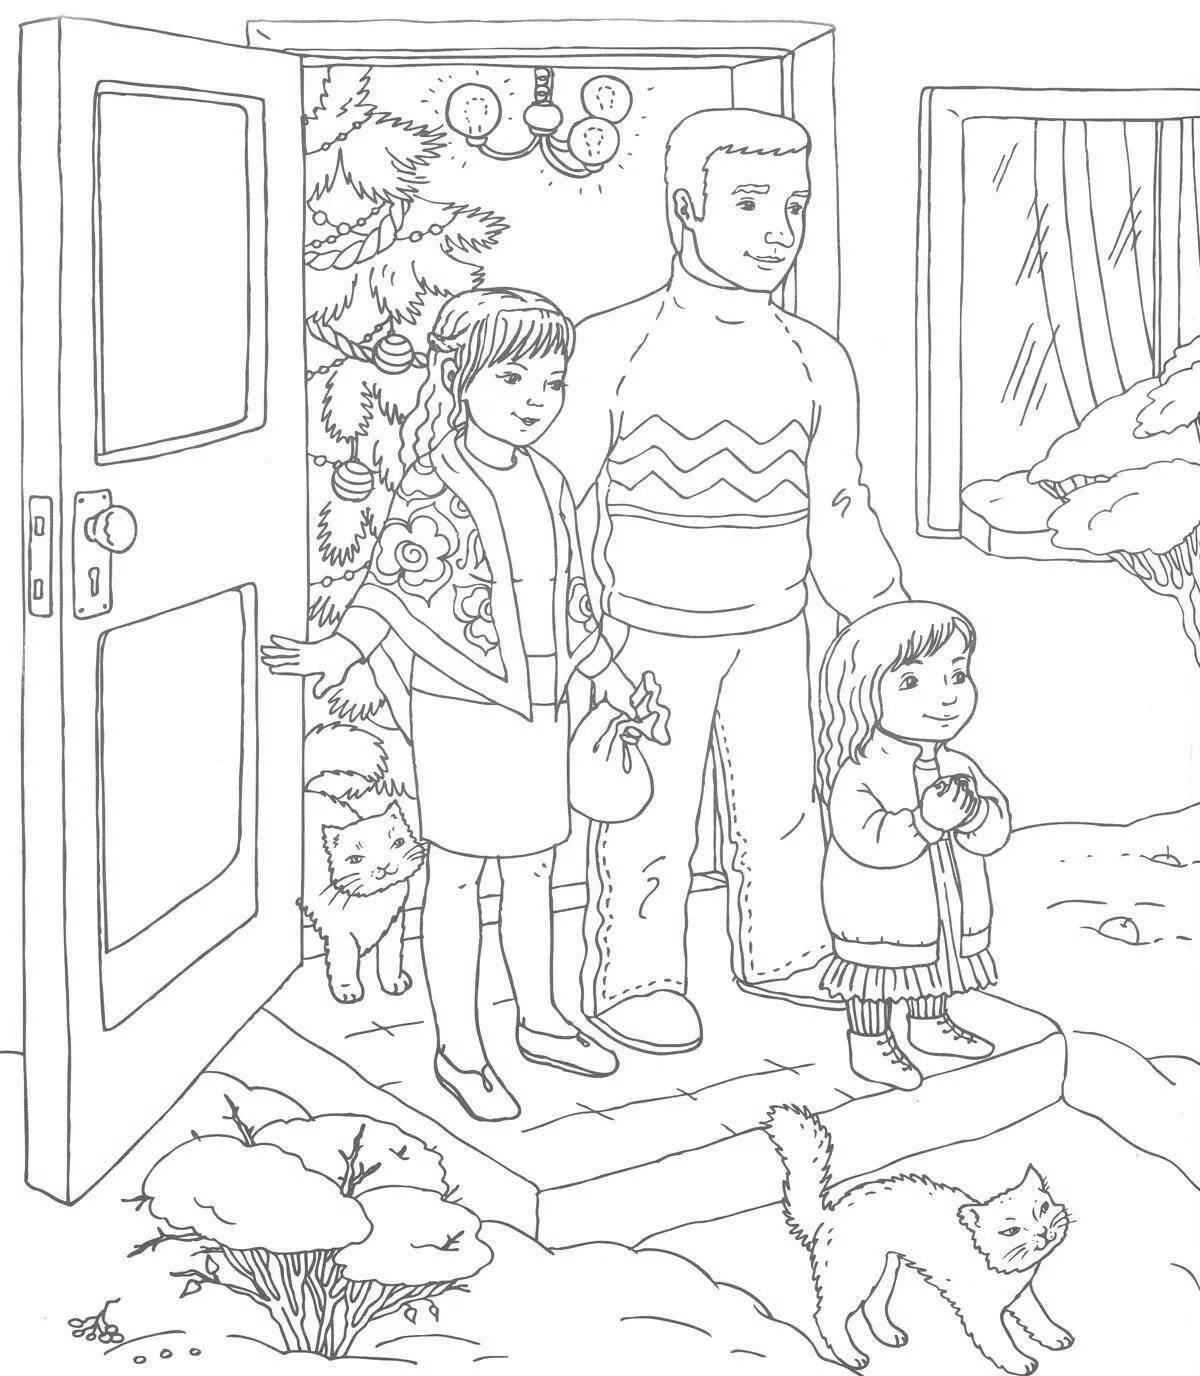 Gorgeous Christmas family coloring book